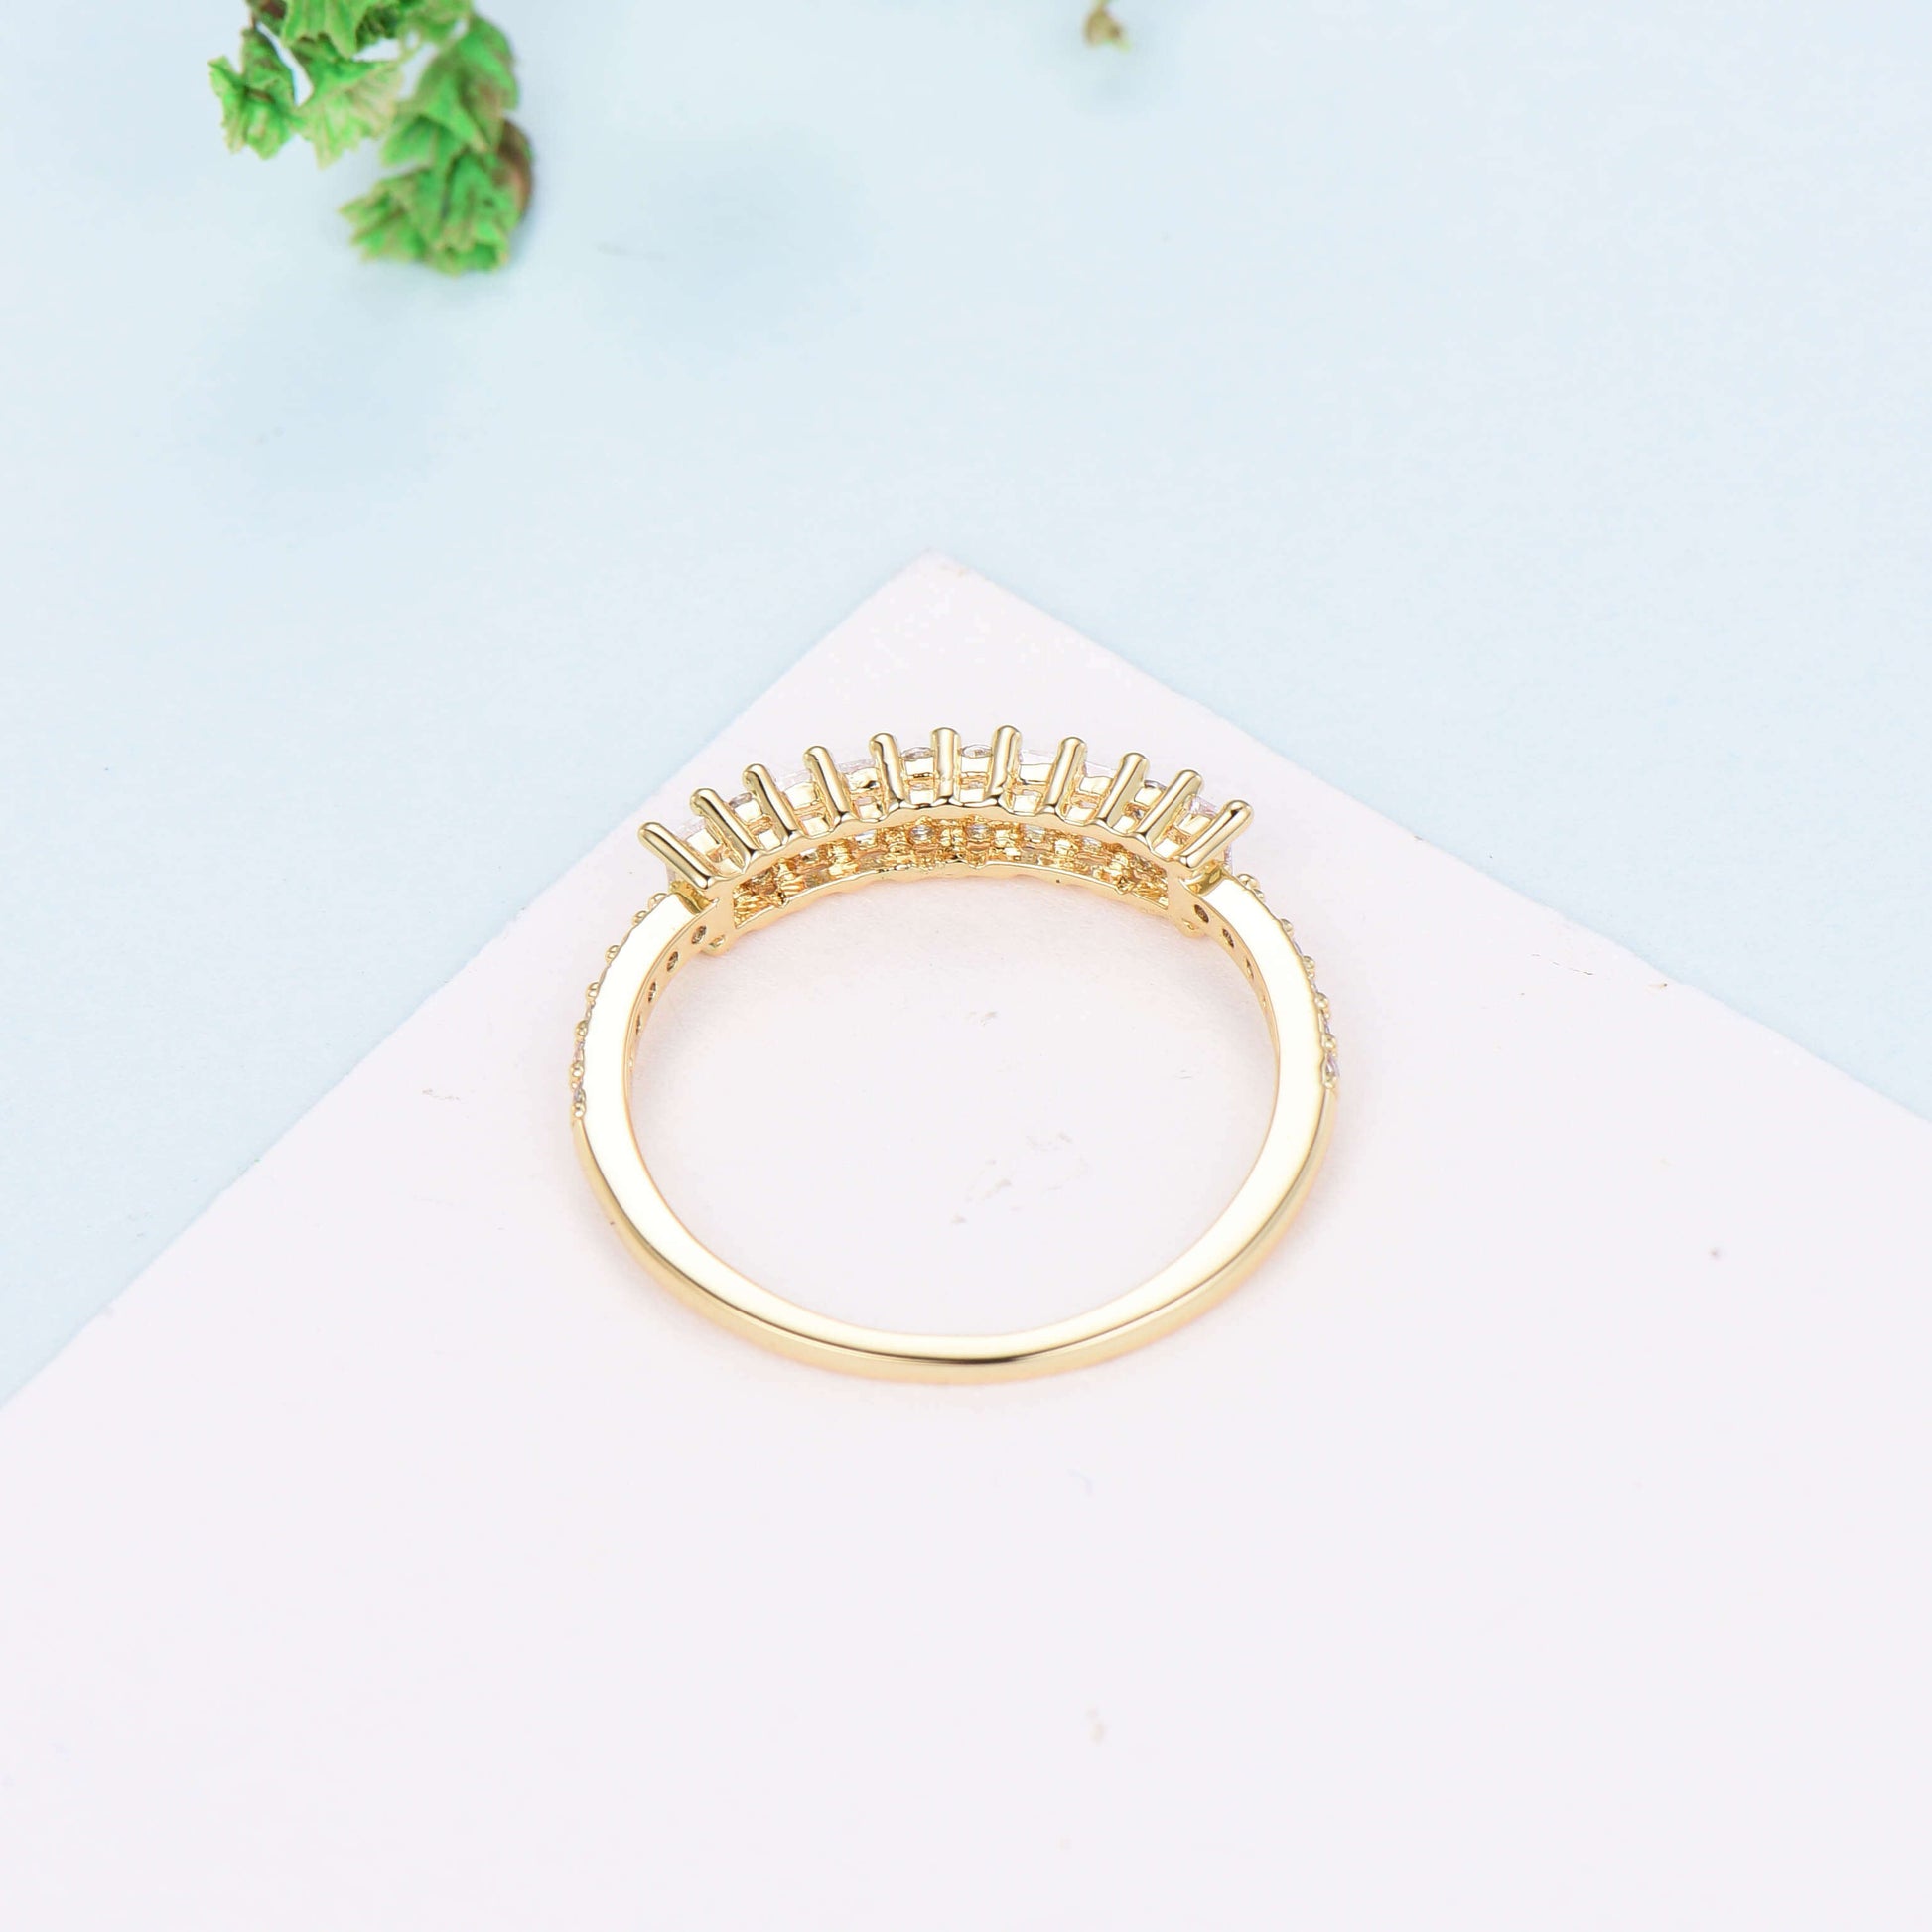 Baguette cut moissanite wedding ring Unique Half Eternity Moissanite Stacking matching ring Bridal ring,Yellow gold Anniversary band ring - PENFINE